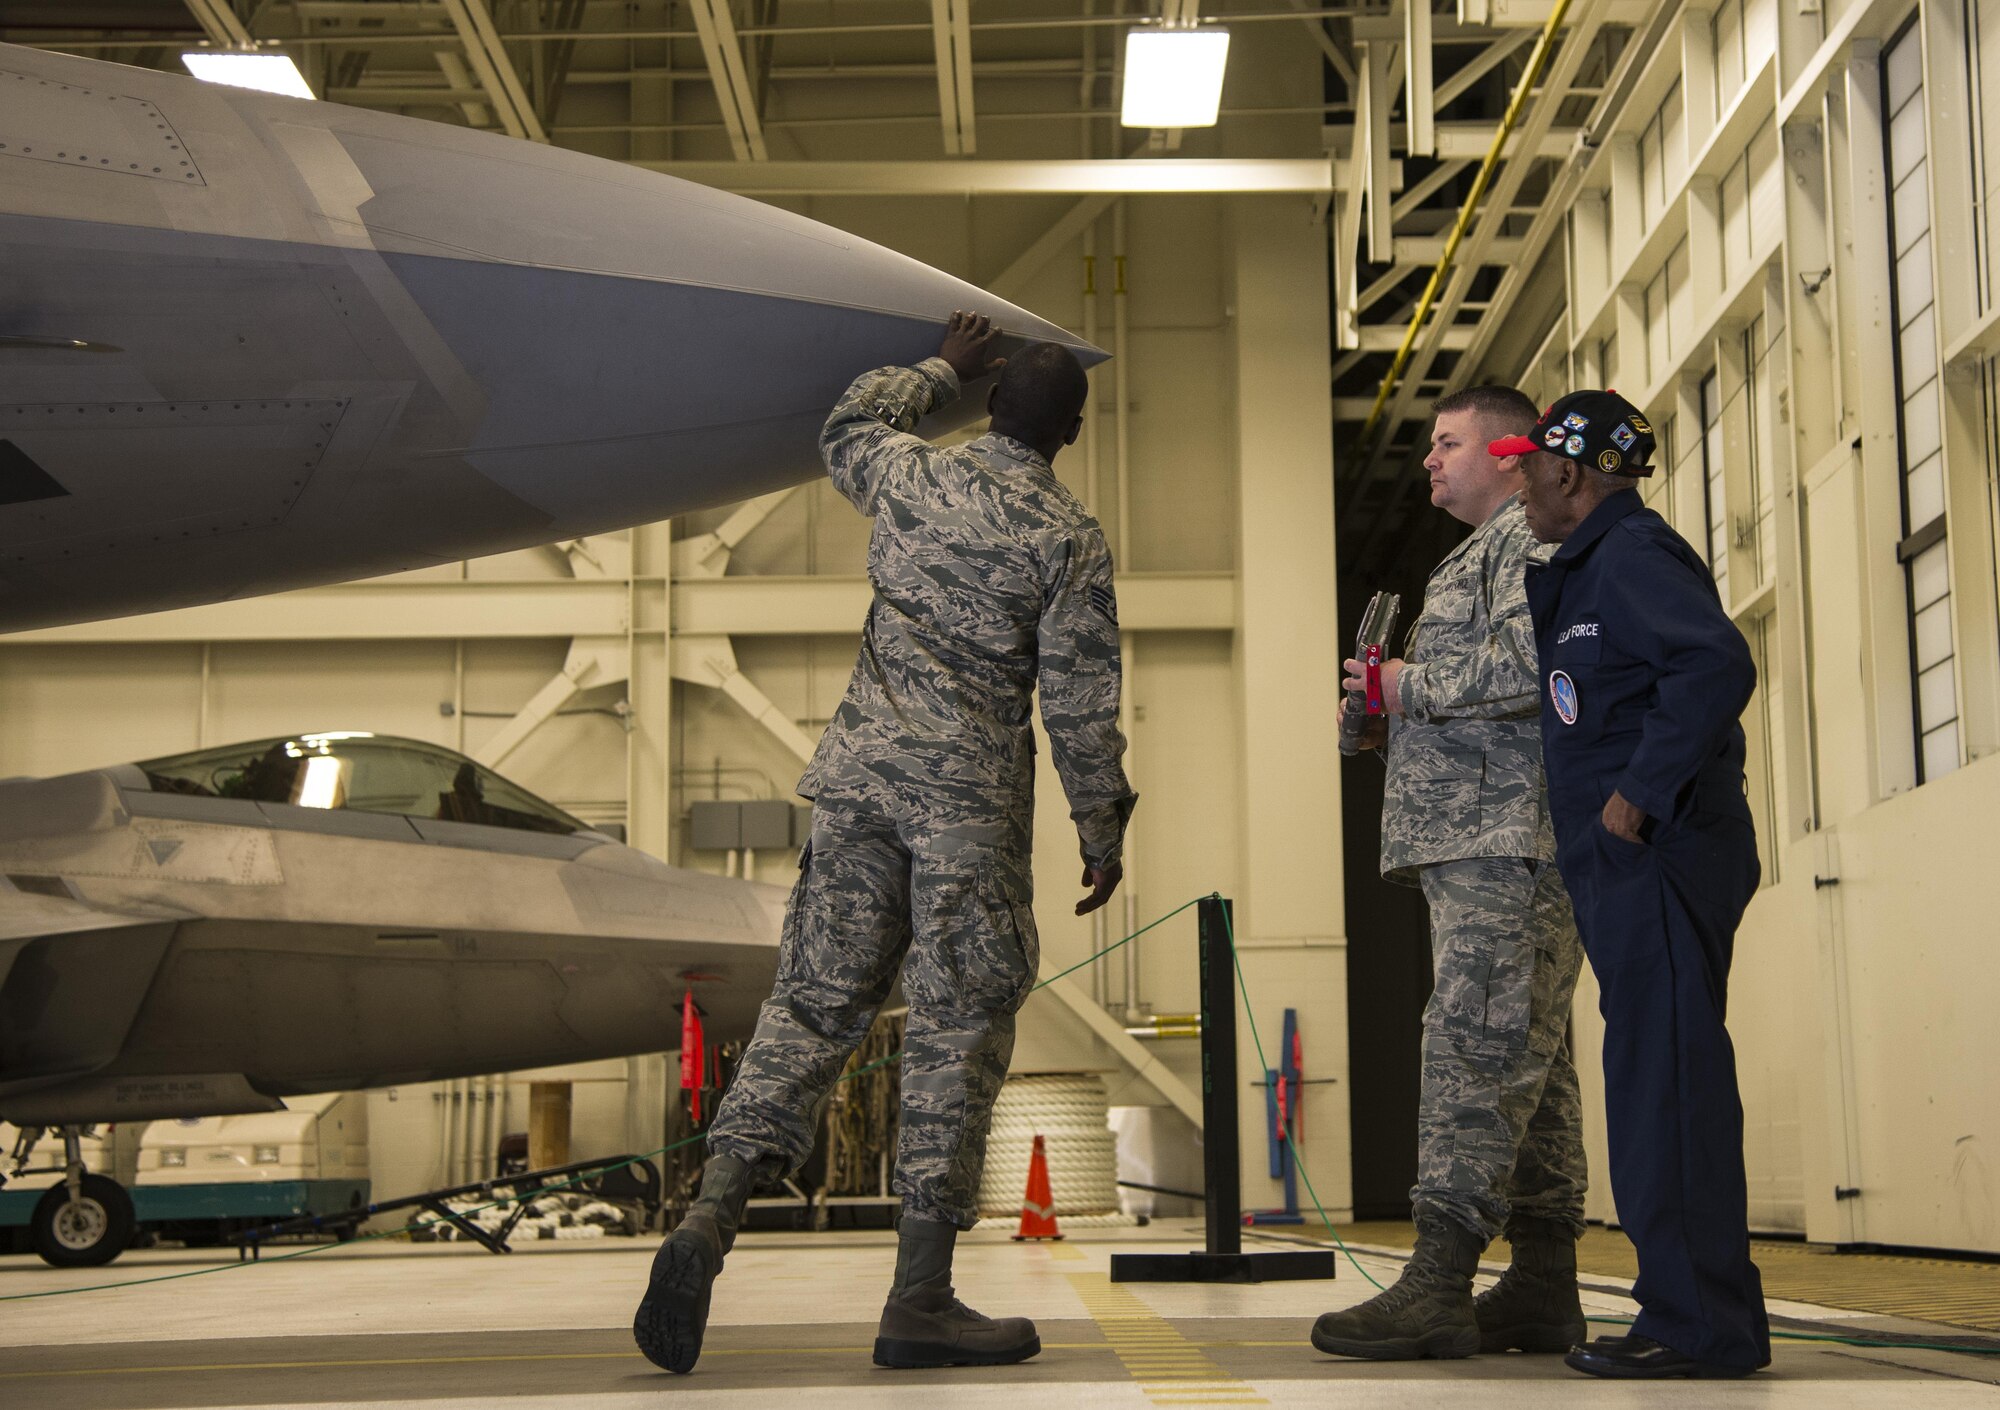 U.S. Air Force Staff Sgt. Stephen Teamer, 477th Aircraft Maintenance Squadron crew chief, demonstrates his knowledge of F-22 Raptors to Army Air Corps Staff Sgt. Leslie Edwards, a Tuskegee Airman of the 477th Bombardment Group, and U.S. Air Force Tech. Sgt. Jeremiah Frye, 477th Fighter Group quality assurance inspector, at Joint Base Elmendorf-Richardson, Alaska, Oct. 14, 2017.  Edwards accompanied Frye for his 5,000th quality assurance inspection, a milestone he reached in nine years which typically takes 28 years to accomplish. (U.S. Air Force photo by Senior Airman Curt Beach)